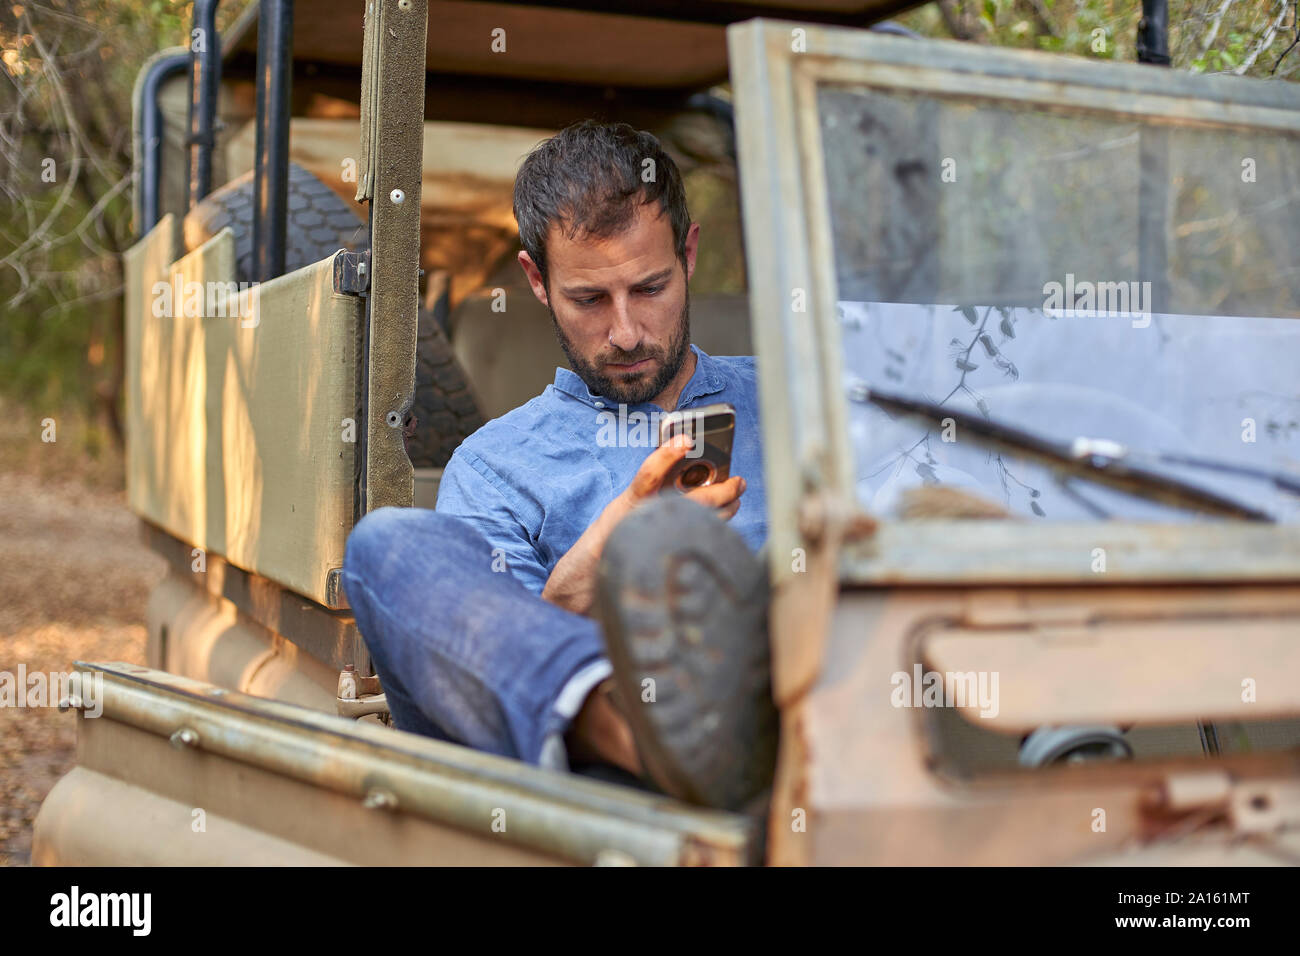 Man sitting in by off-road car, using smartphone Stock Photo